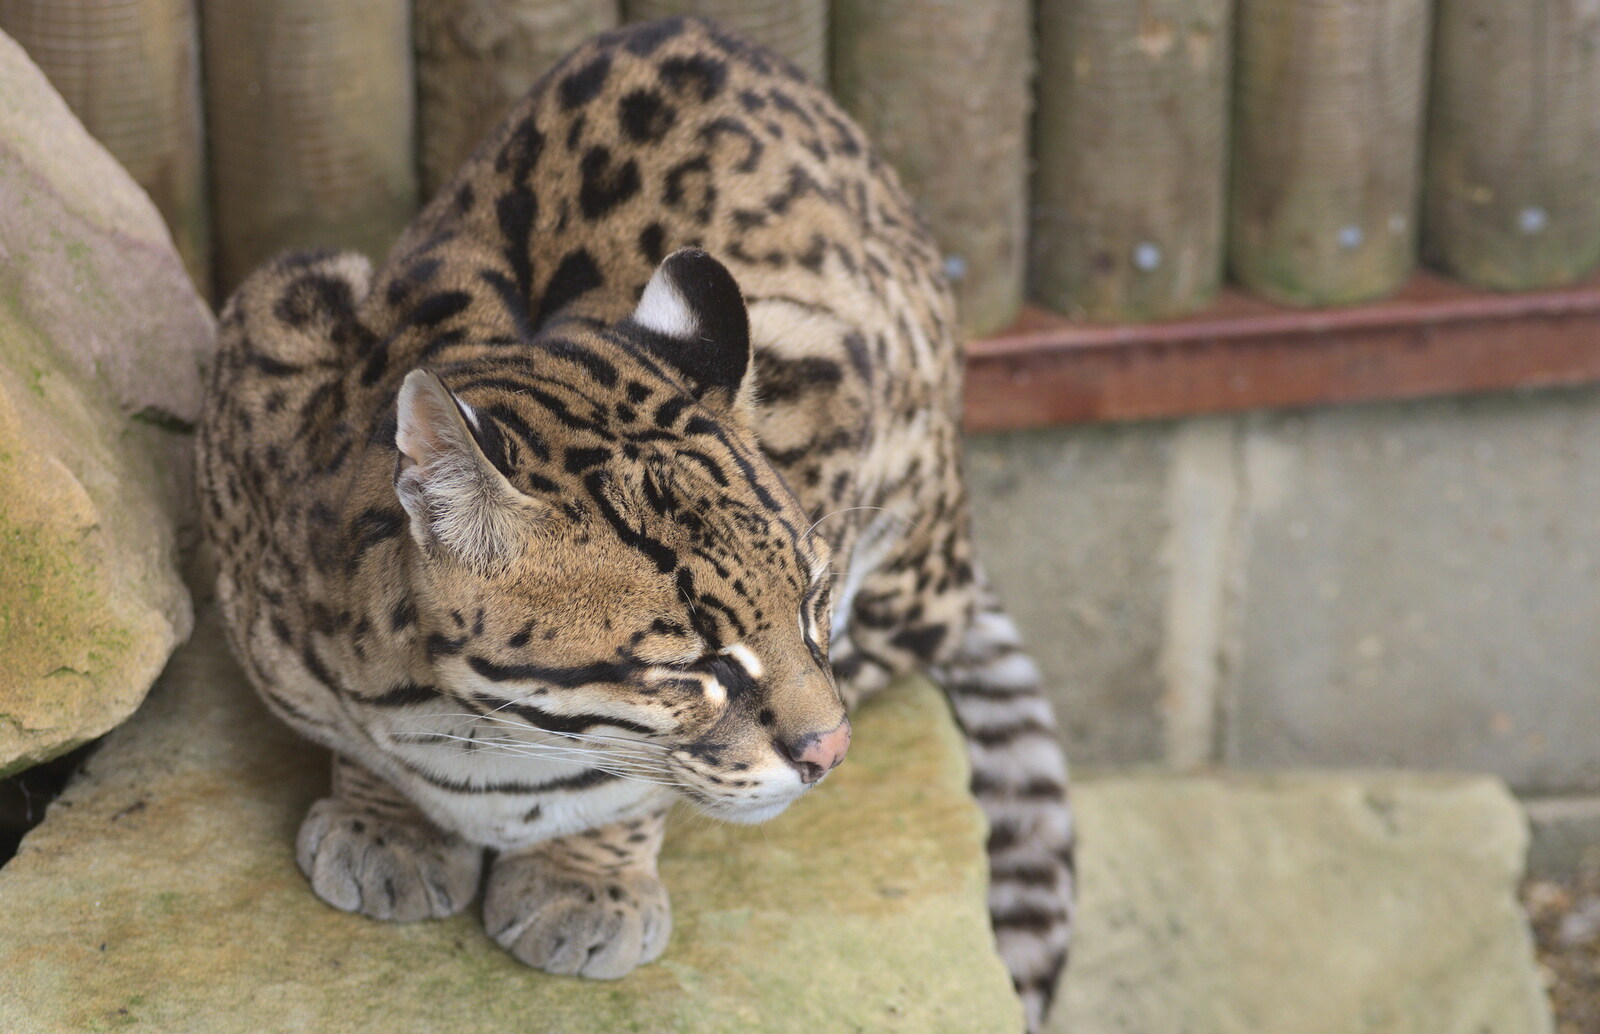 An ocelot has a doze from Tiger Cubs at Banham Zoo, Banham, Norfolk - 6th August 2013